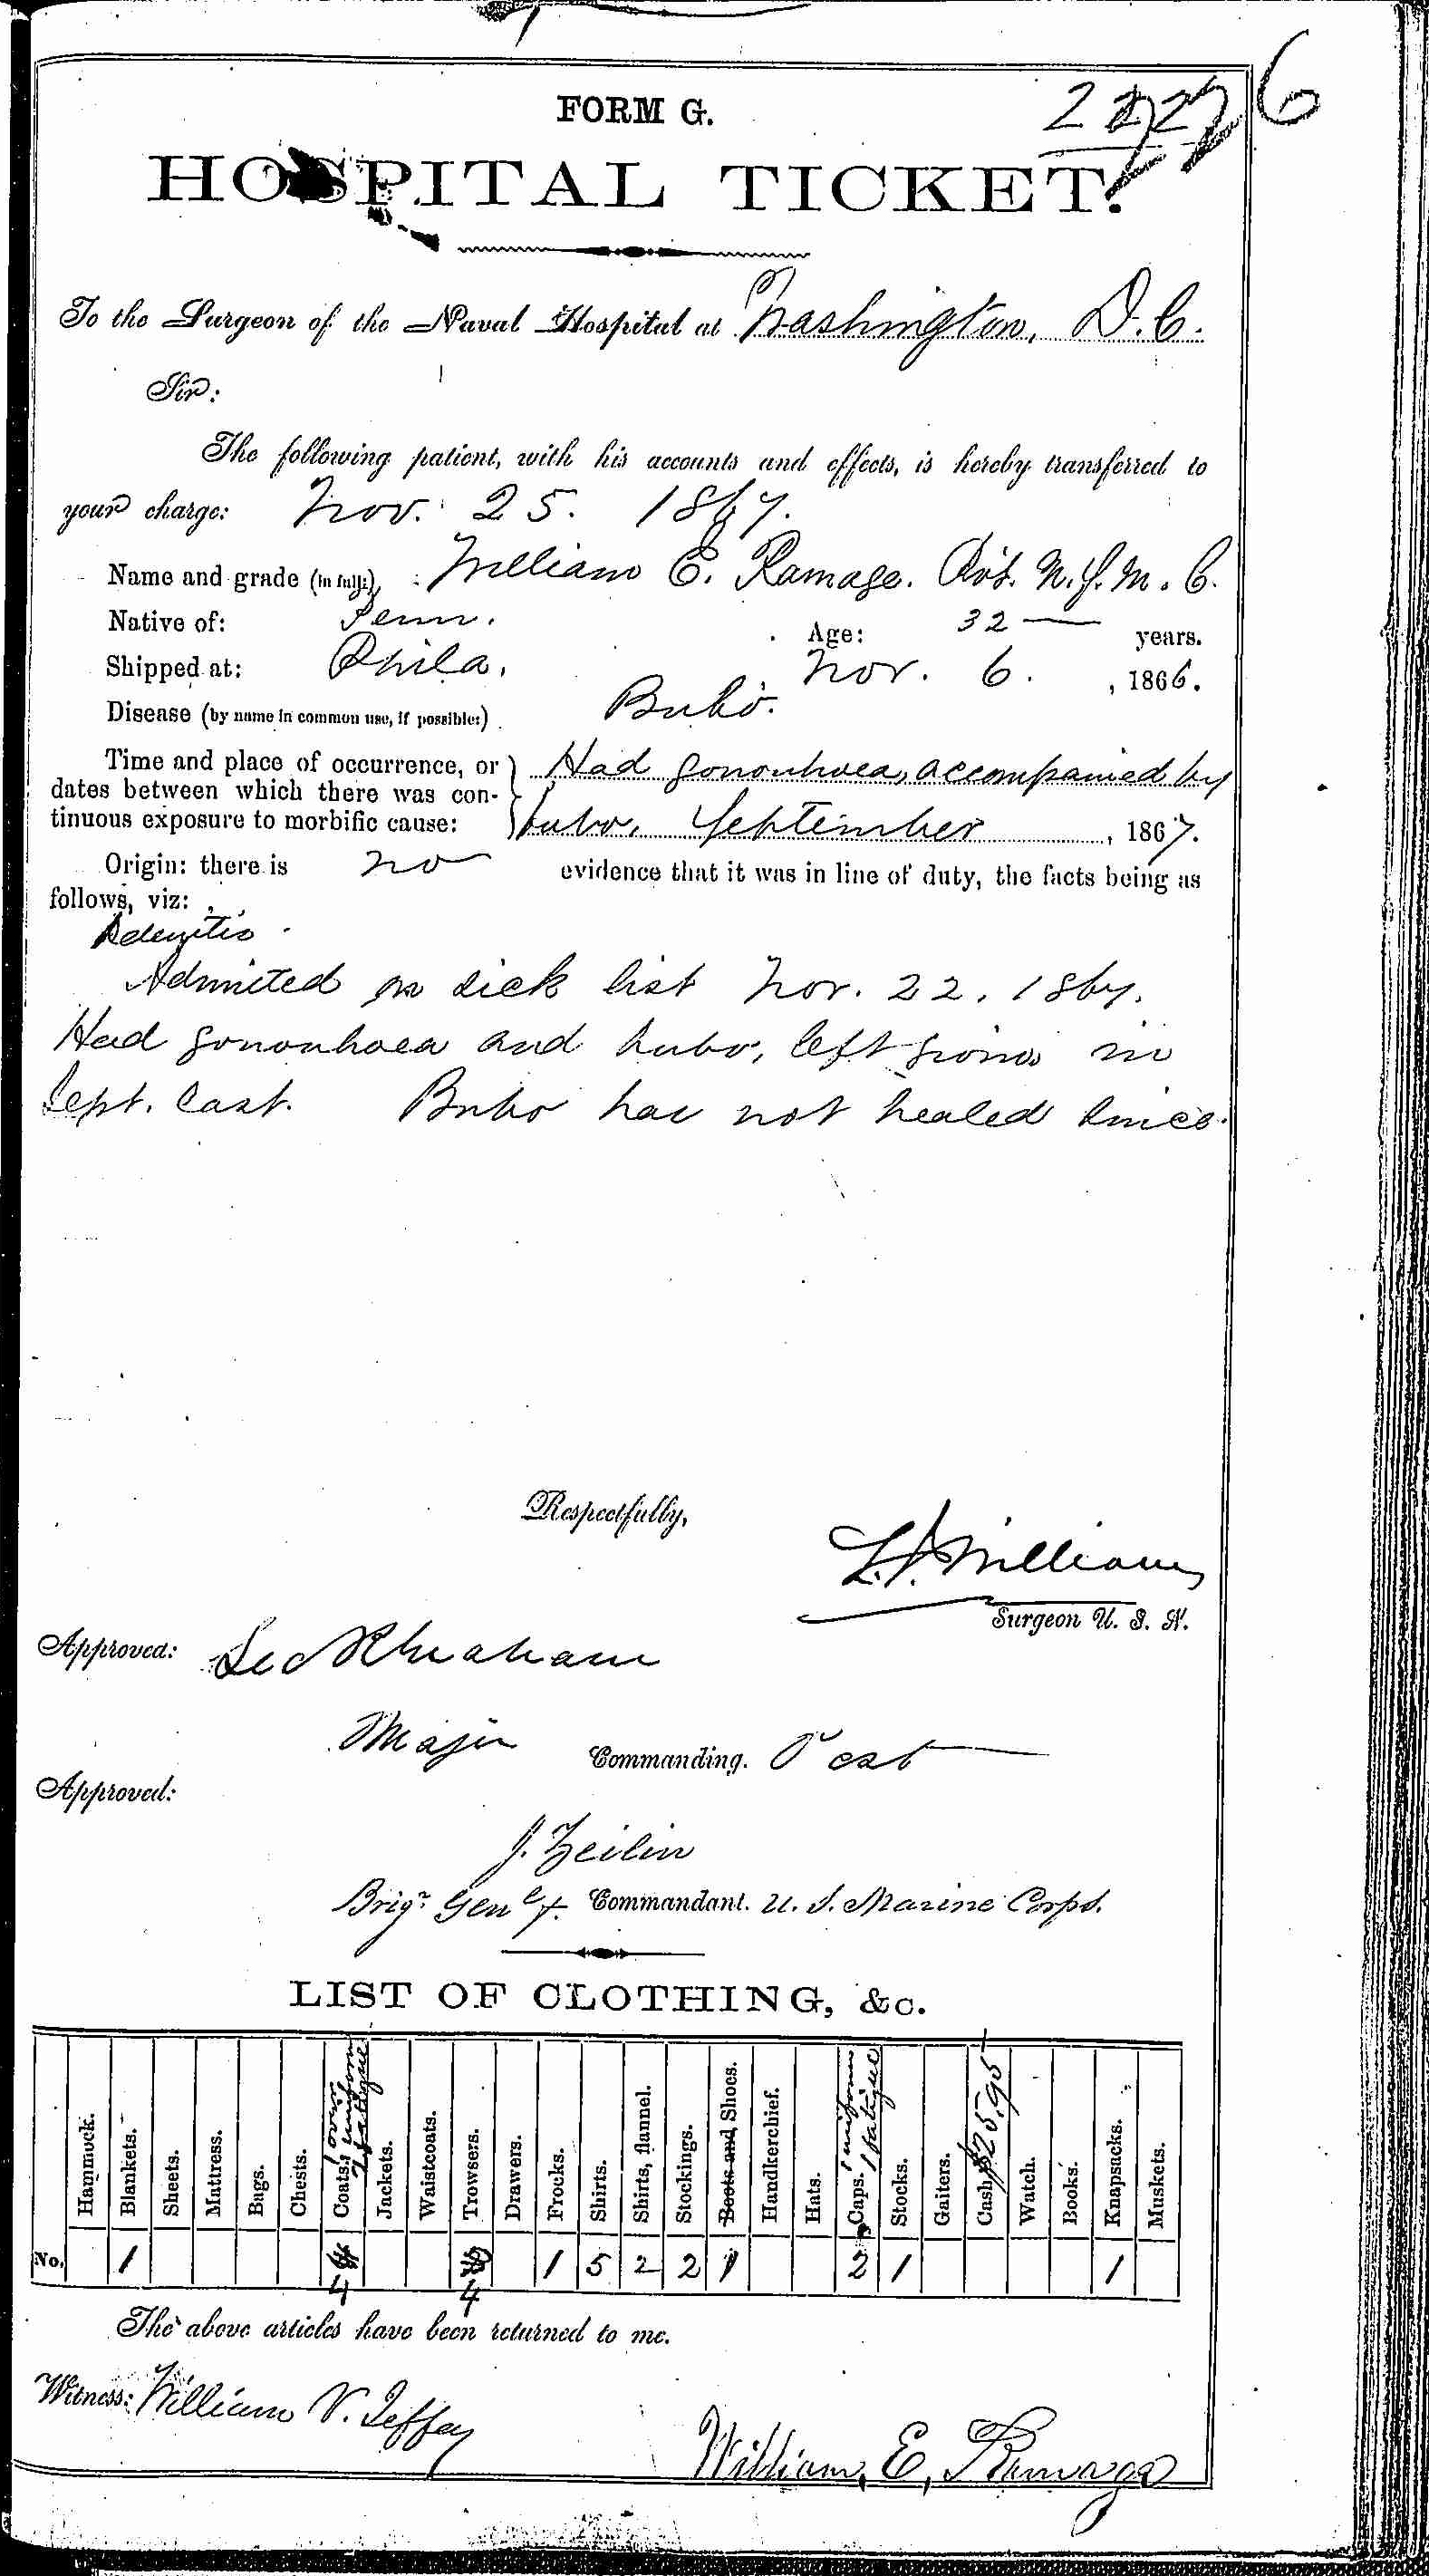 Entry for William E. Ramage (page 1 of 2) in the log Hospital Tickets and Case Papers - Naval Hospital - Washington, D.C. - 1866-68